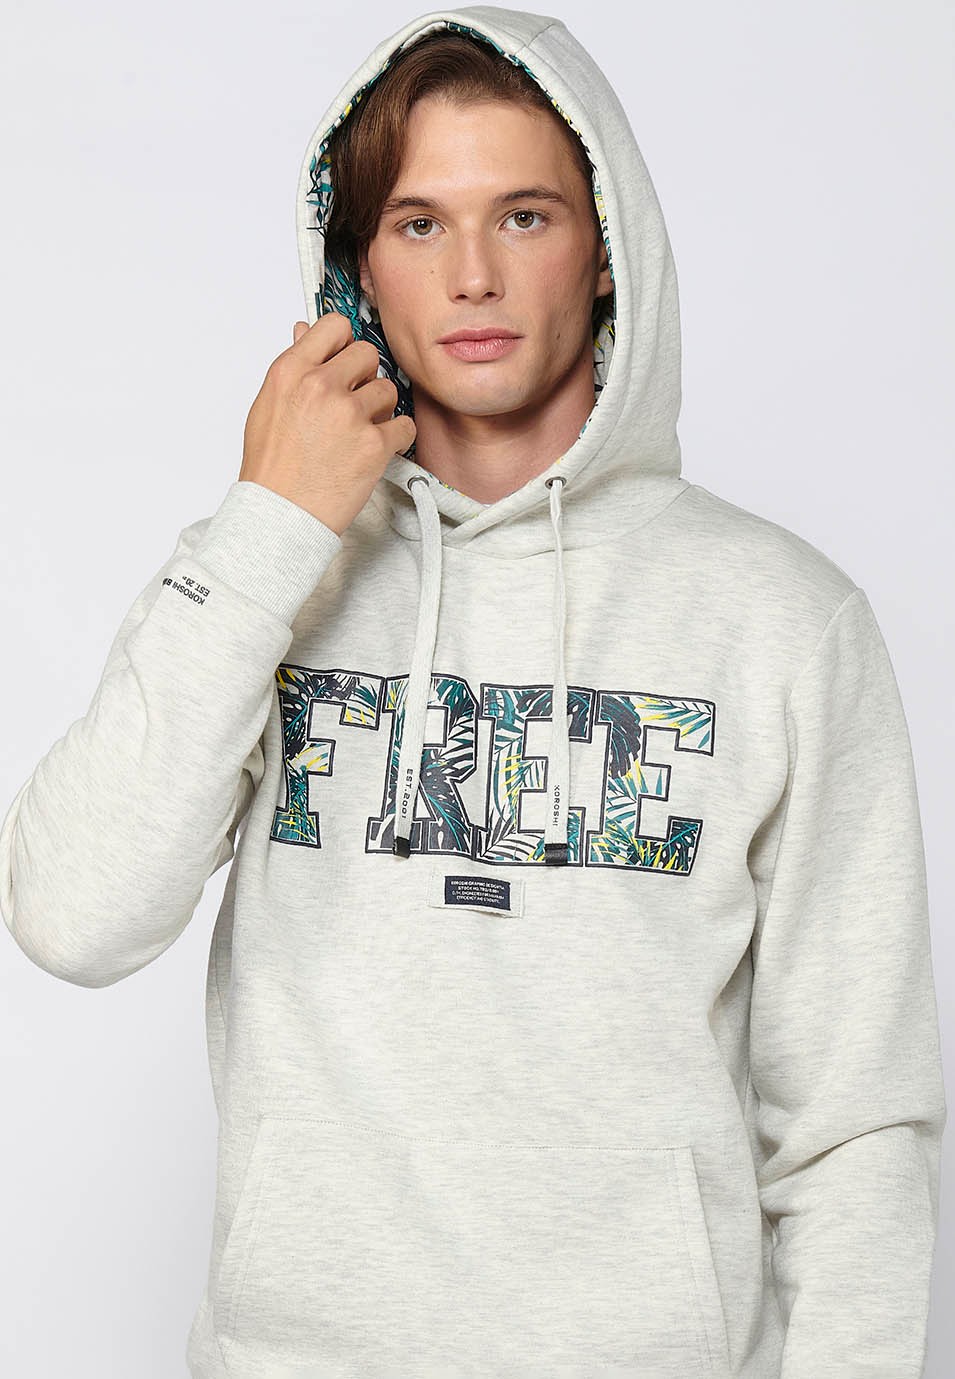 Long-sleeved sweatshirt with adjustable hooded collar with drawstring and front letters in Ecru for Men